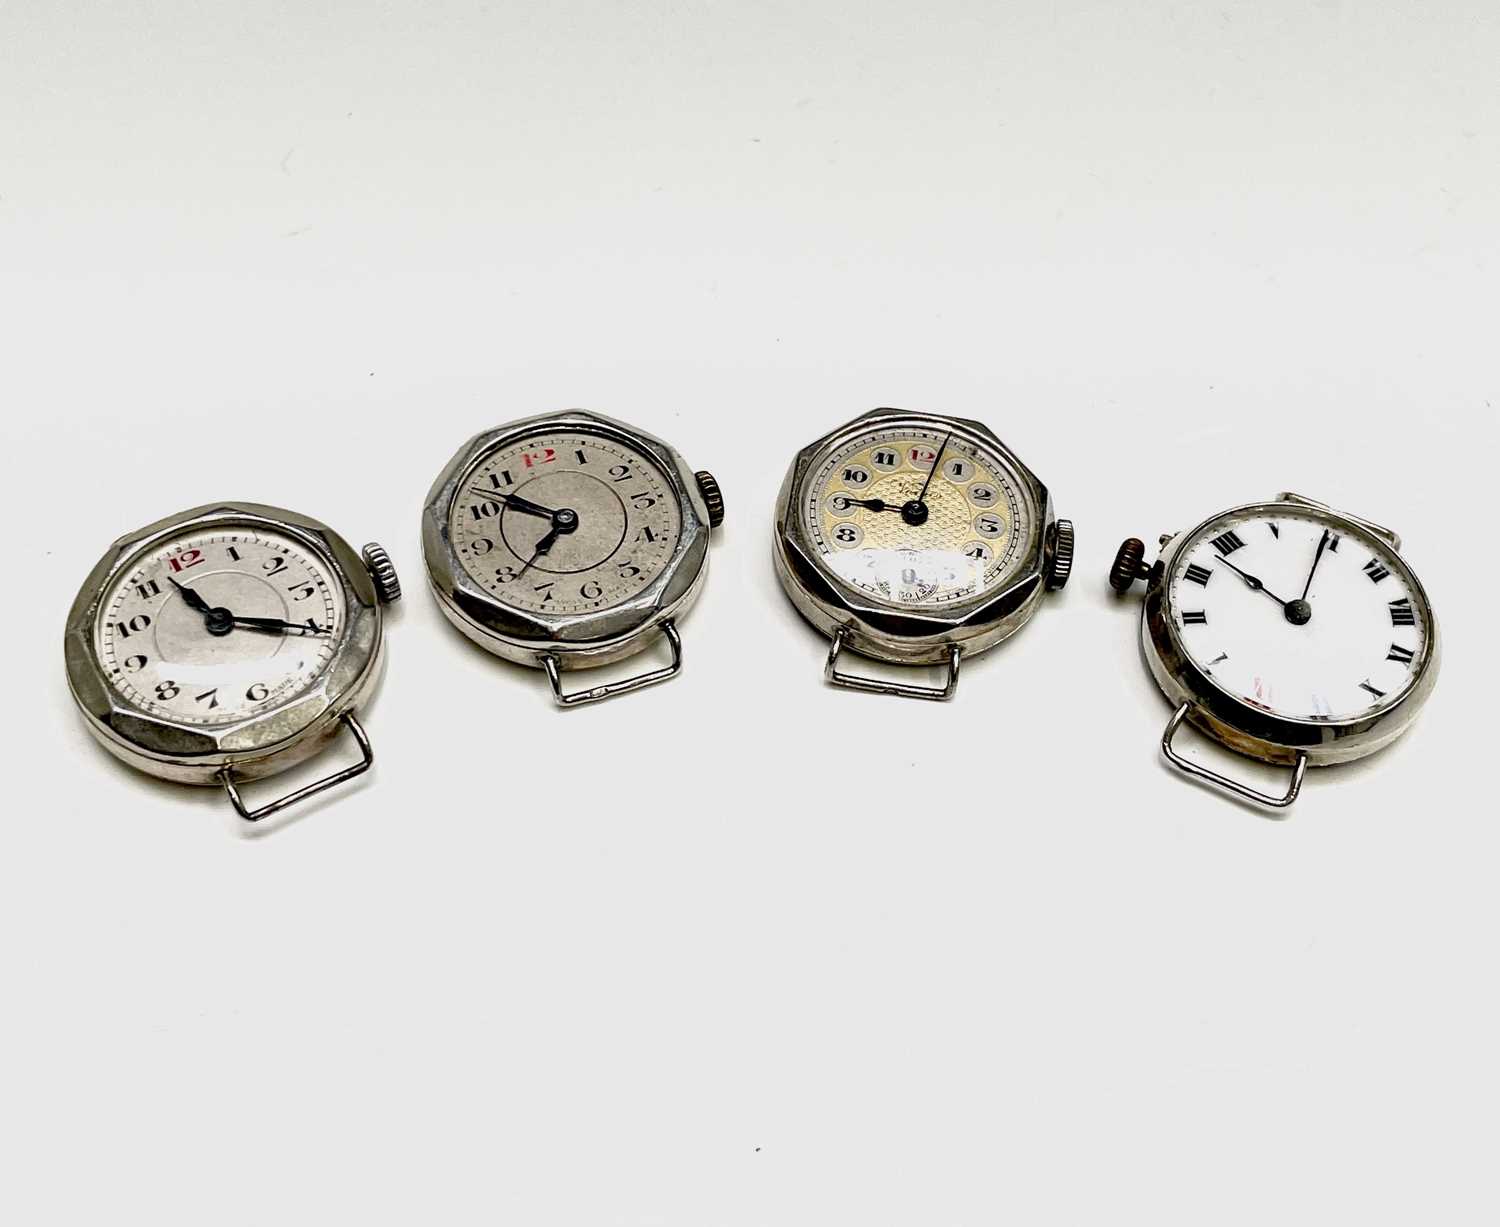 Four ladies silver cased trench style watches.Condition report: All working, used condition